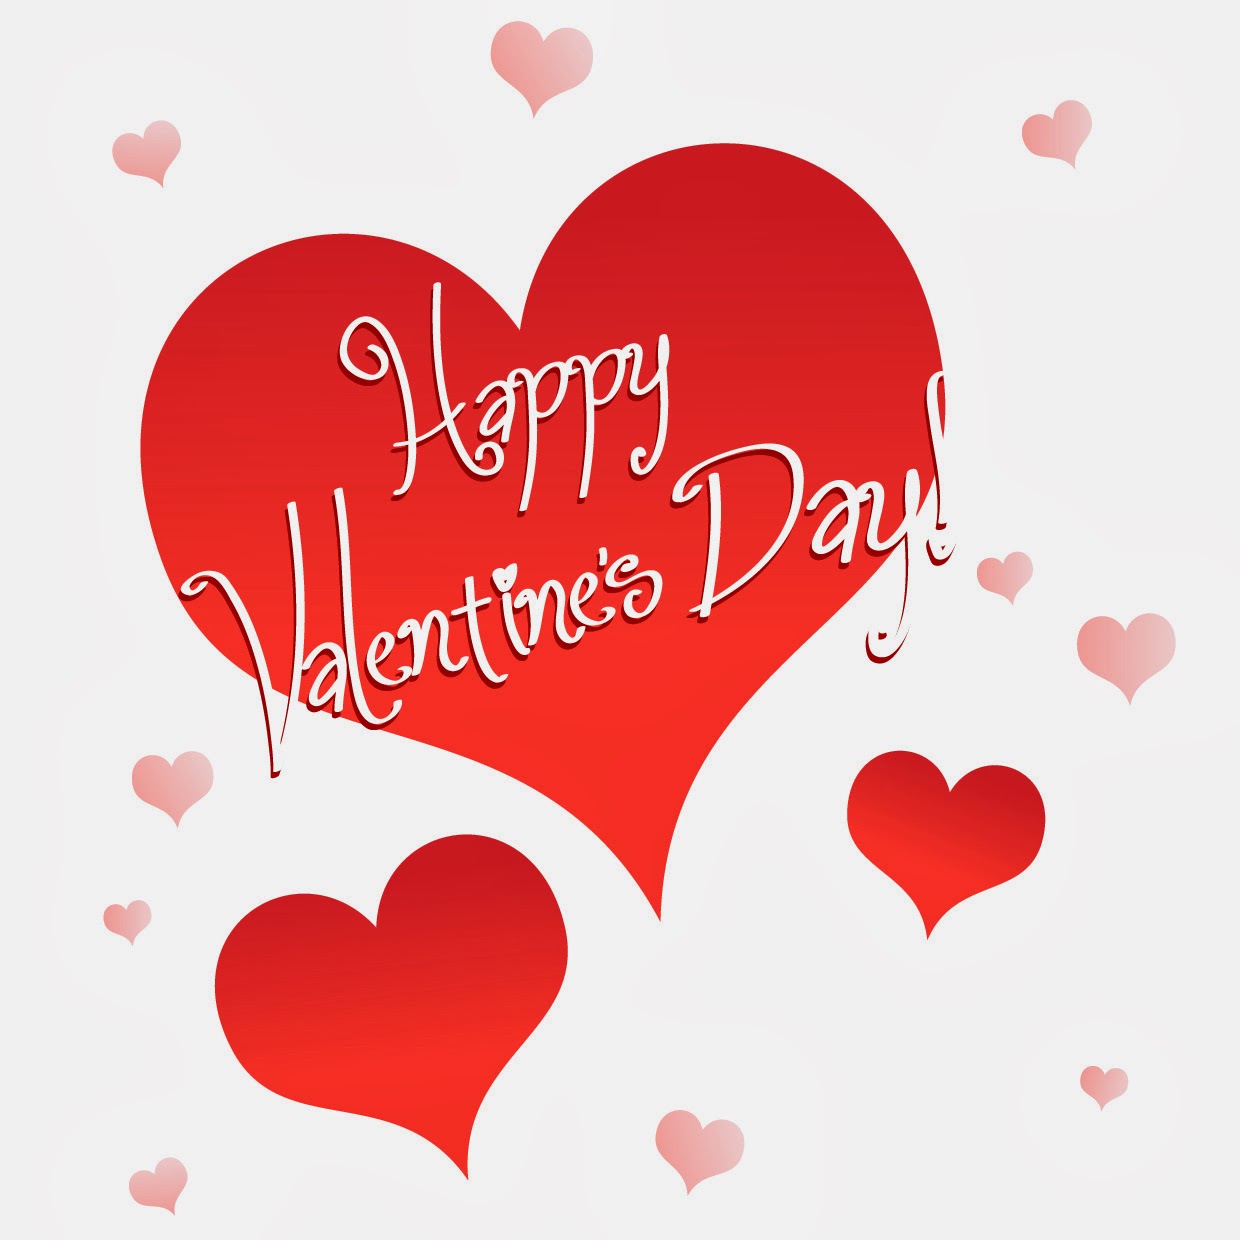 ... day clip art valentine day images clipart valentine day valentine day